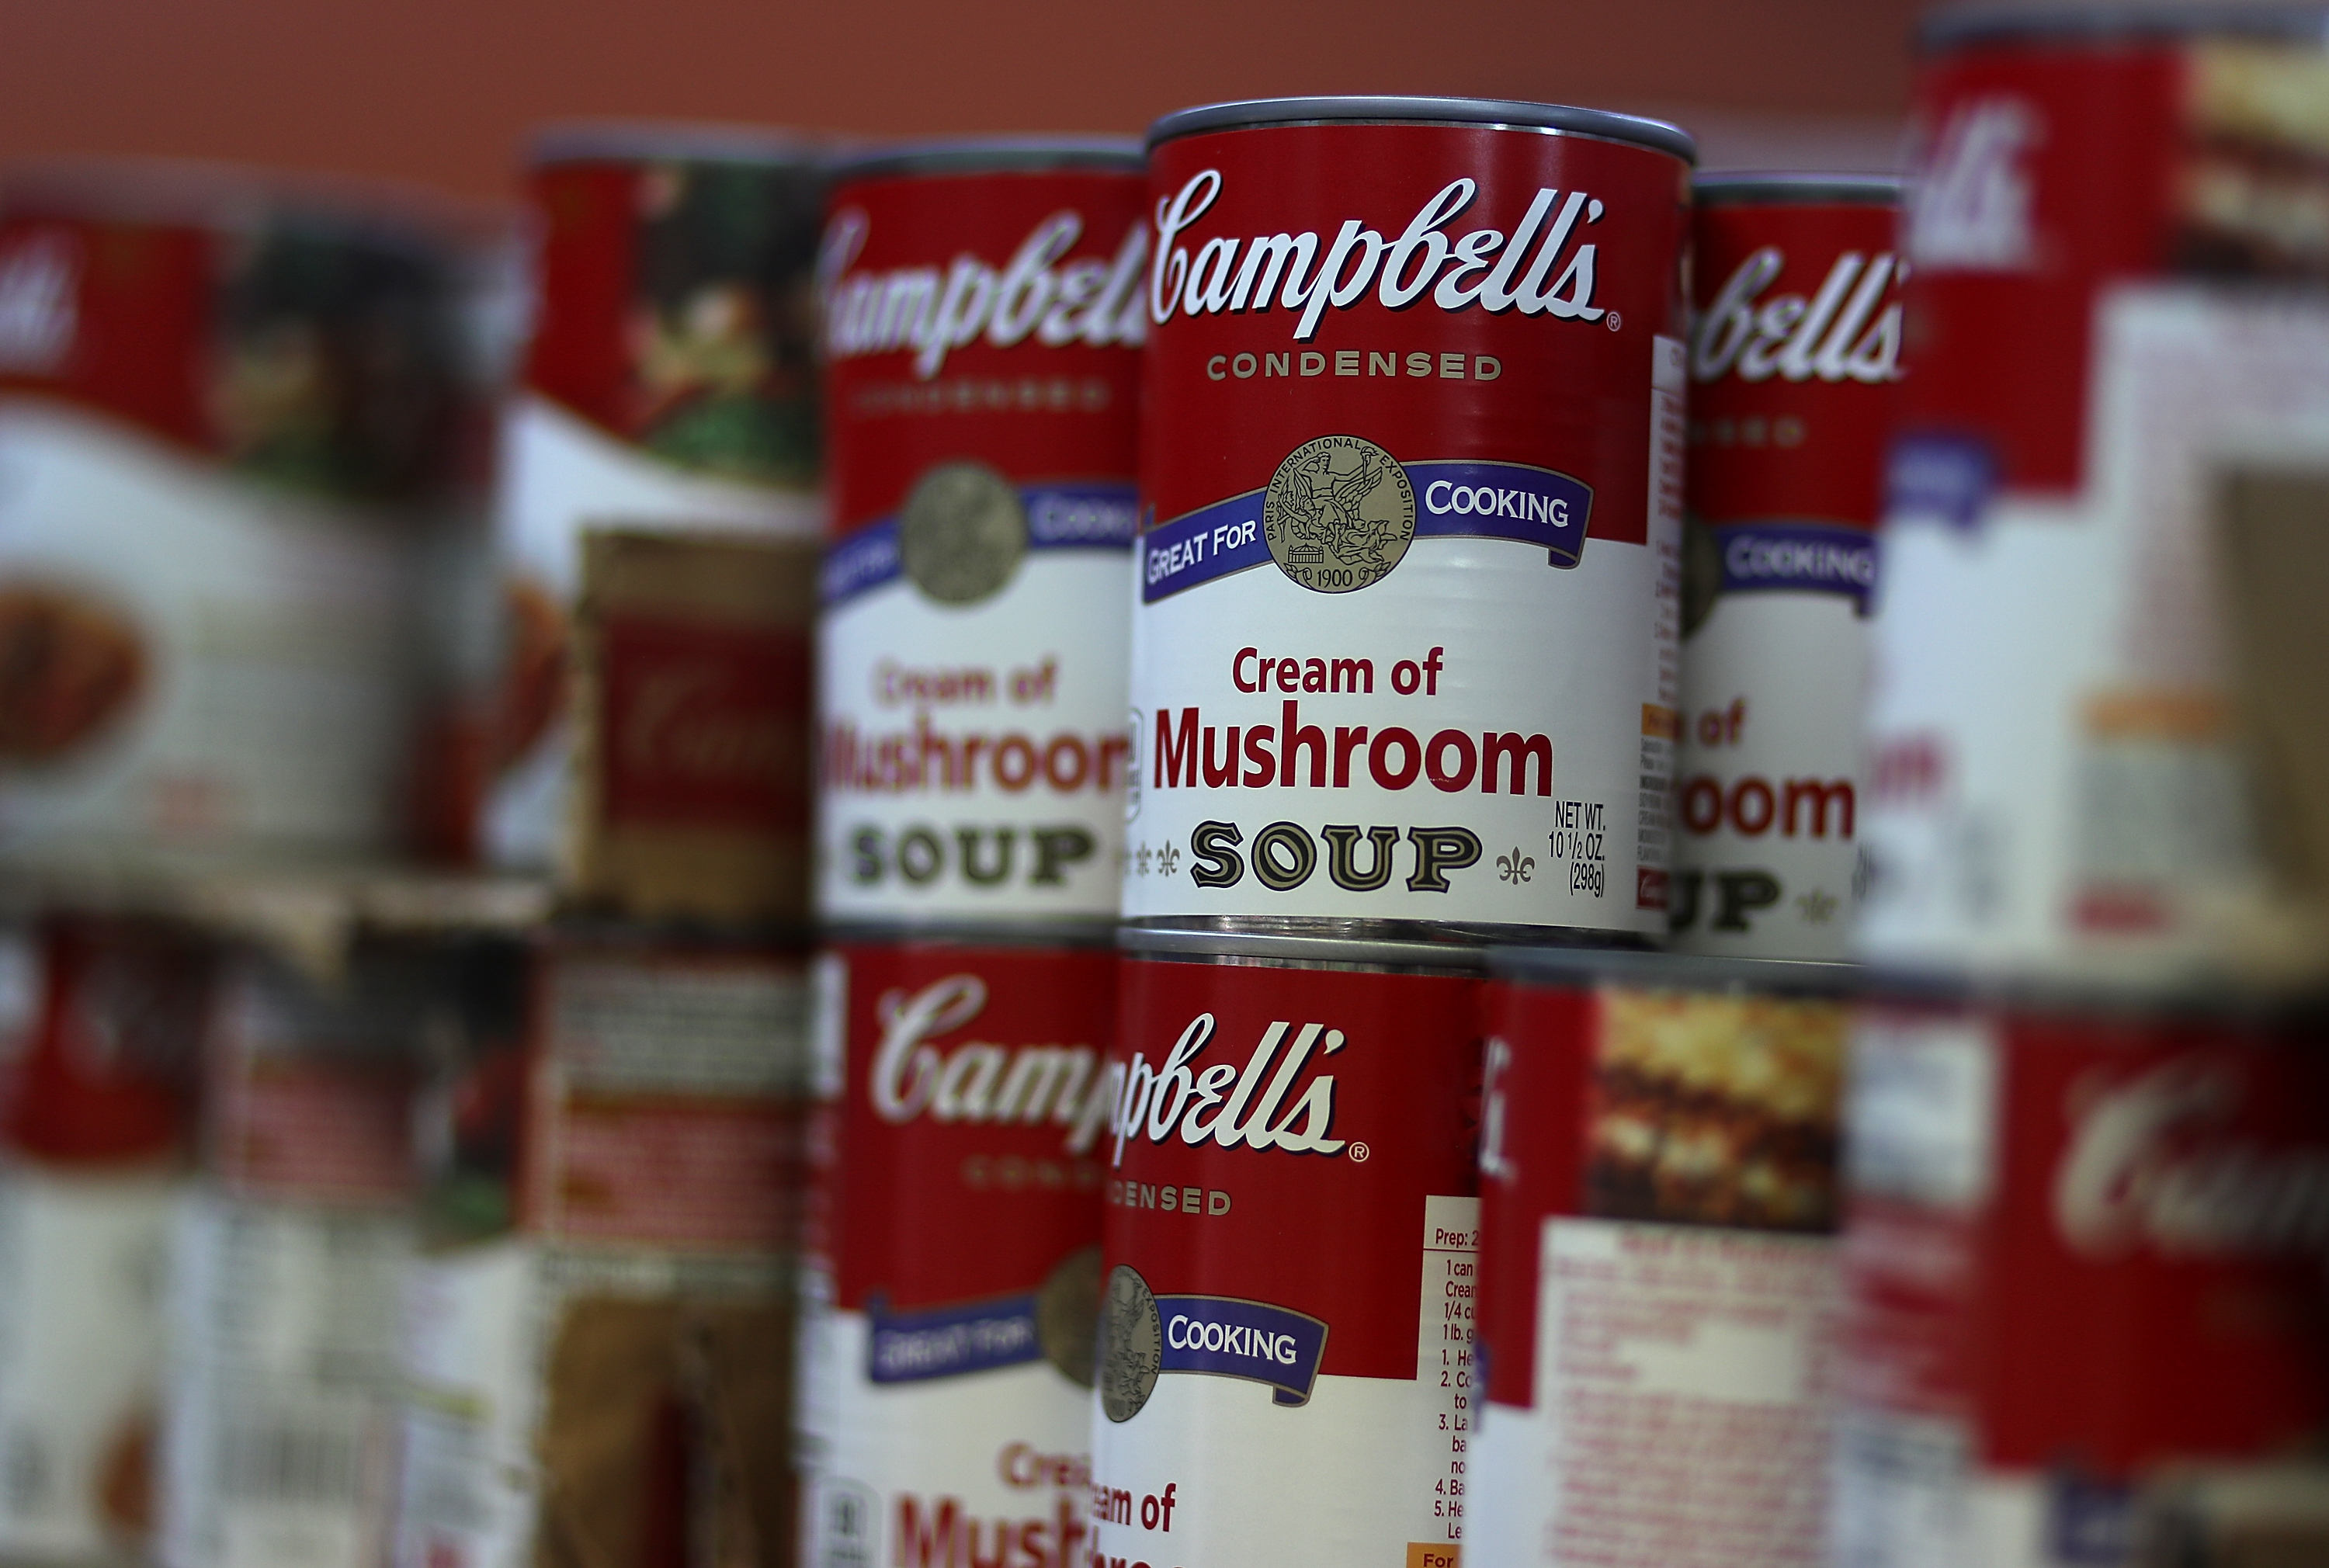 Cans of Campbell's soup are displayed on a supermarket shelf on May 20, 2016 in San Rafael, California.